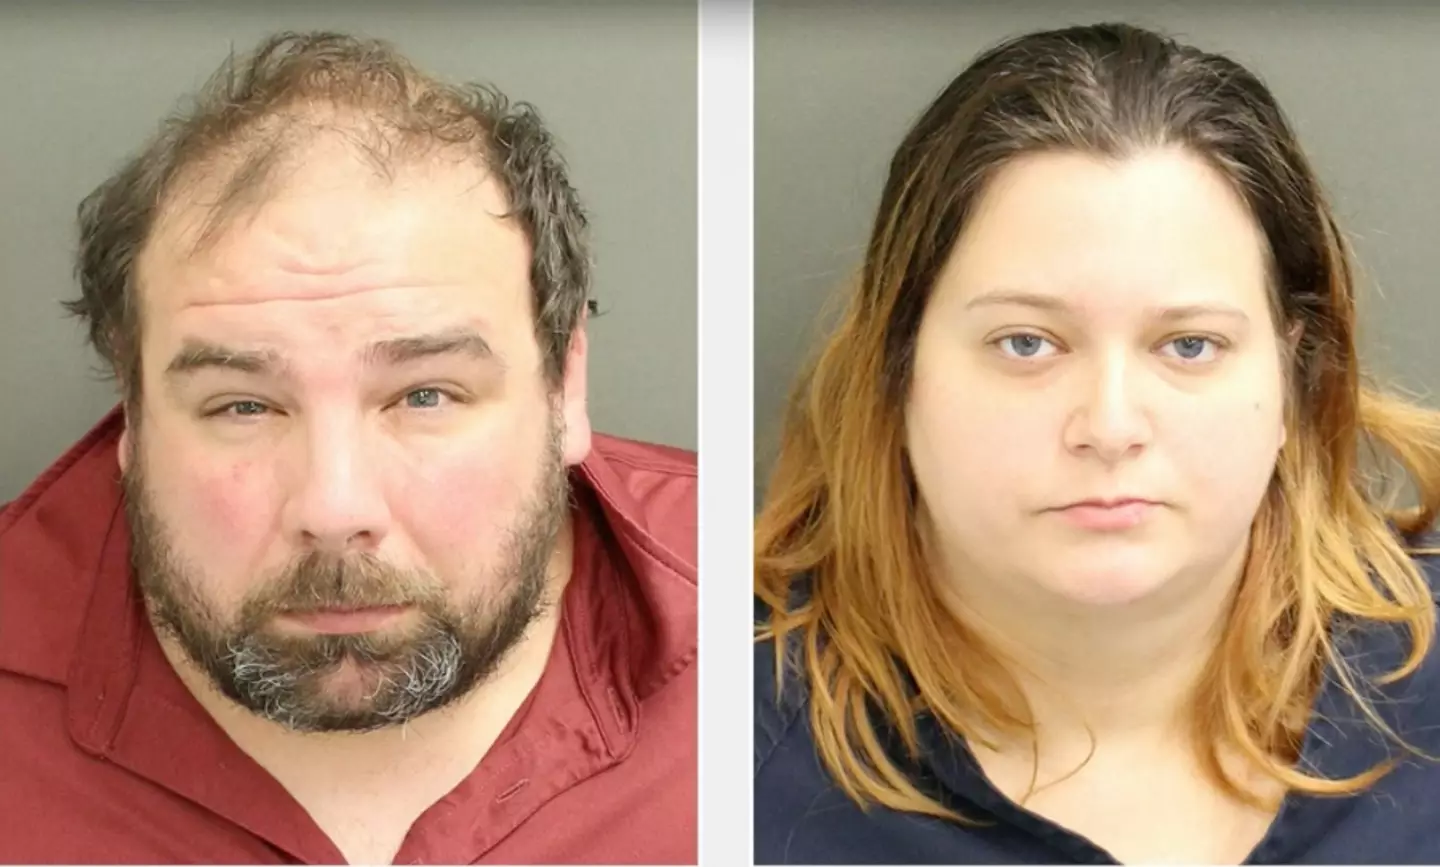 The 11-year-old's mother and stepfather were arrested after the incident at the restaurant.